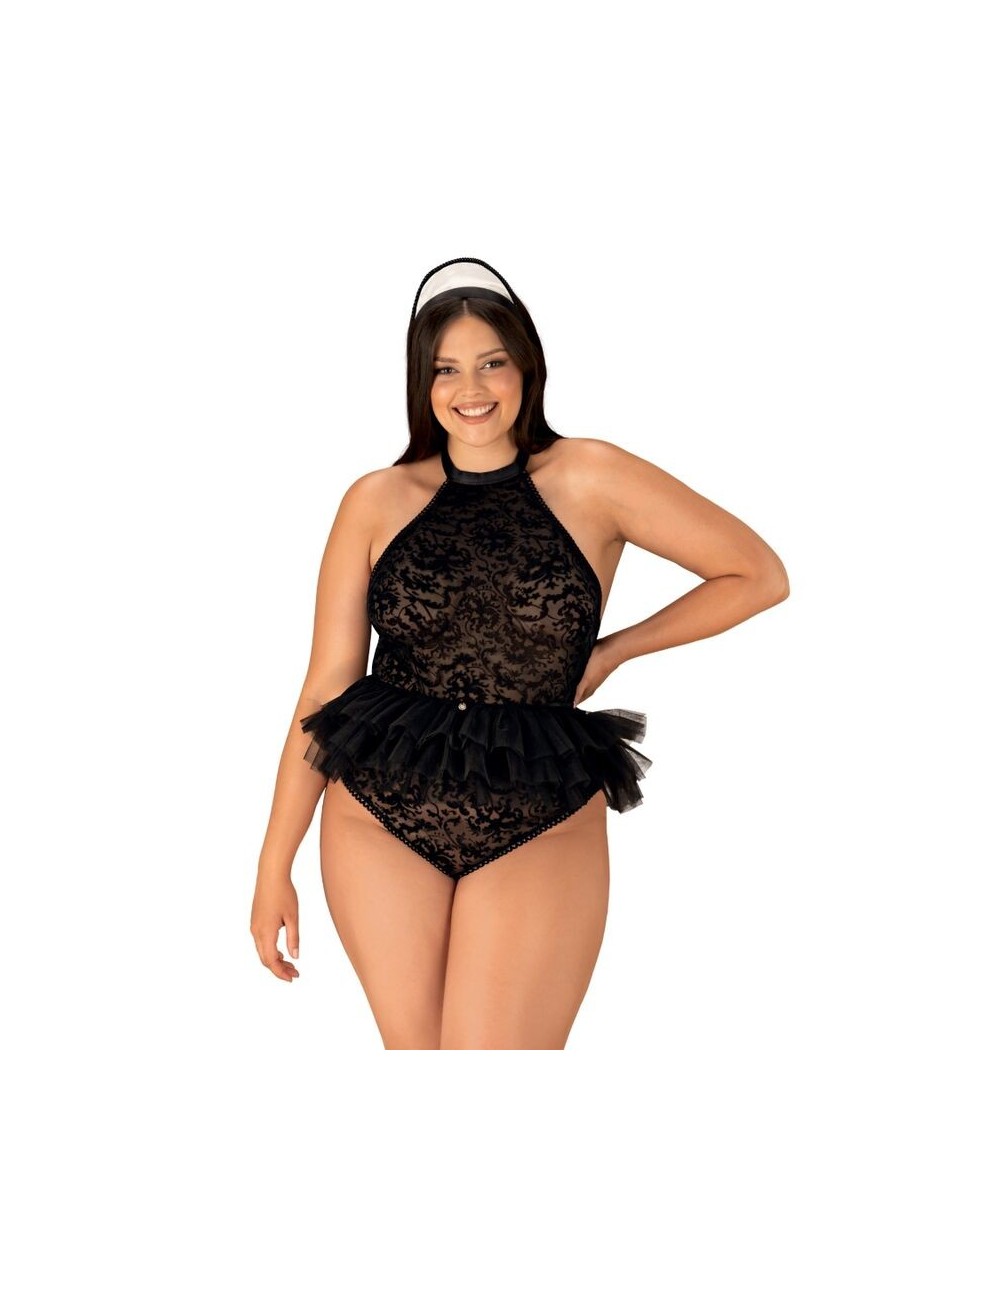 Lingerie - Costumes sexy - OBSESSIVE - COSTUME FRILLES XXL/XXXL - Obsessive Costumes